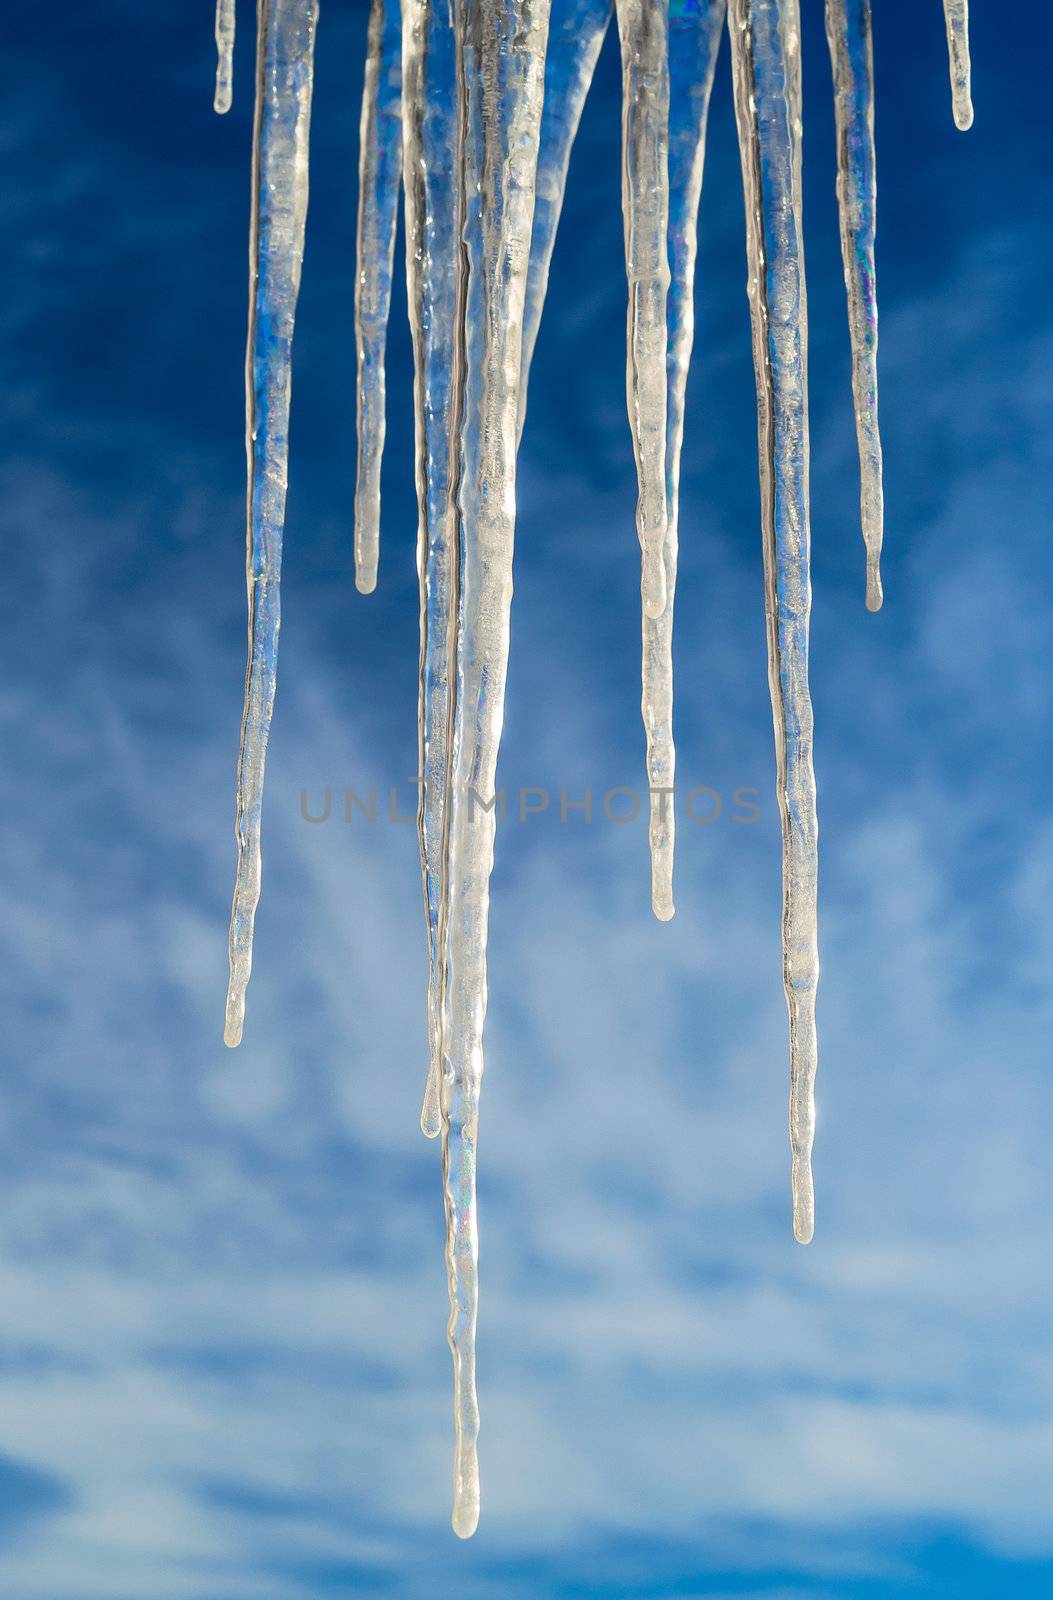 Frozen Icicles Isolated over Blue Sky with clouds